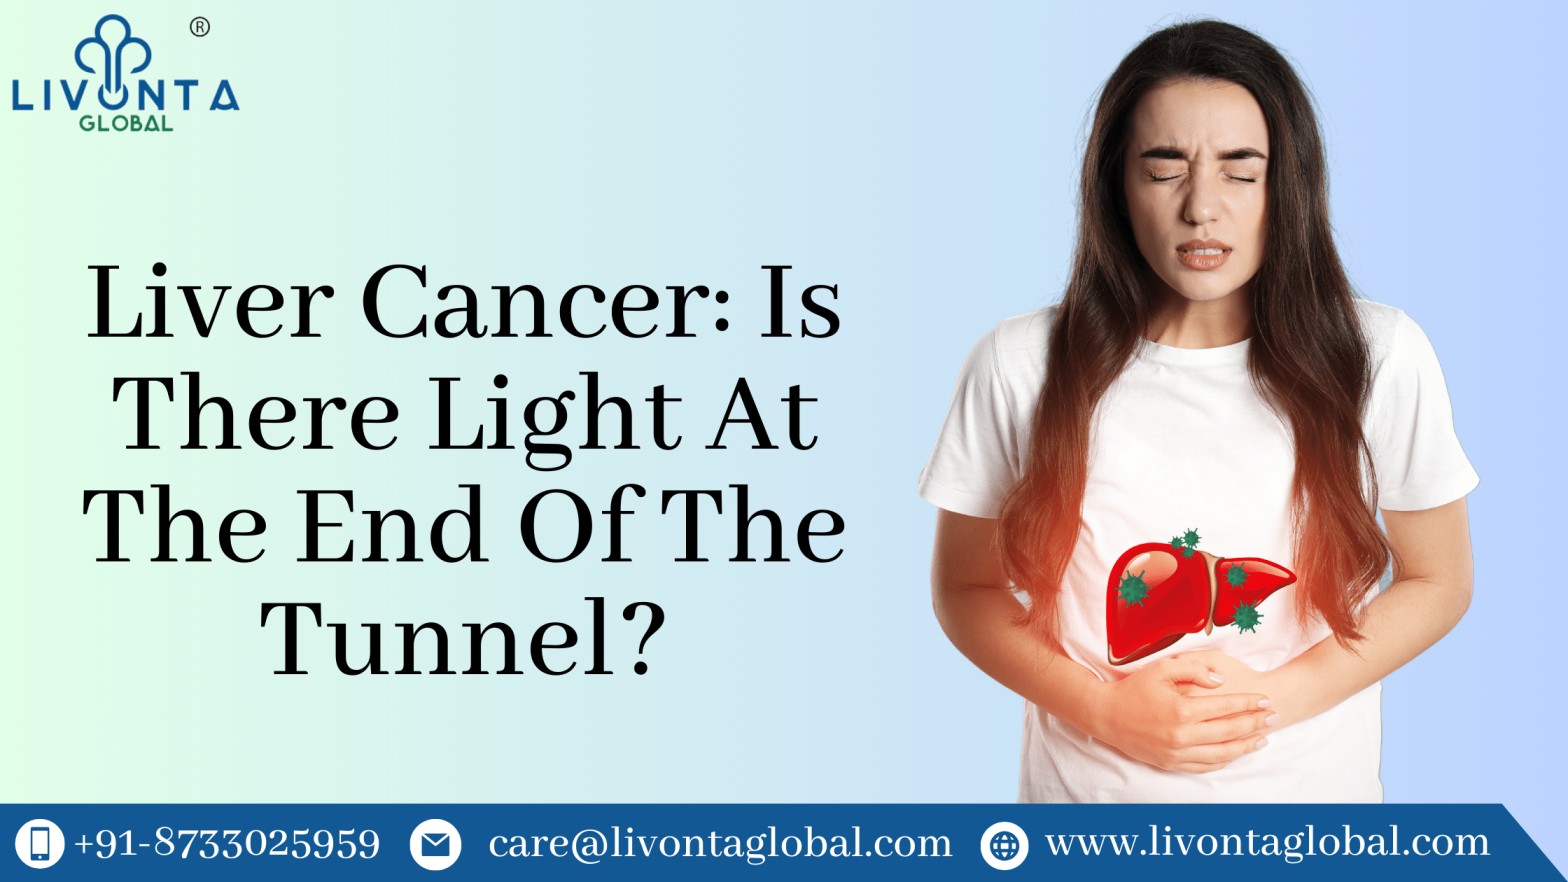 Liver Cancer: Is There Light At The End Of The Tunnel?